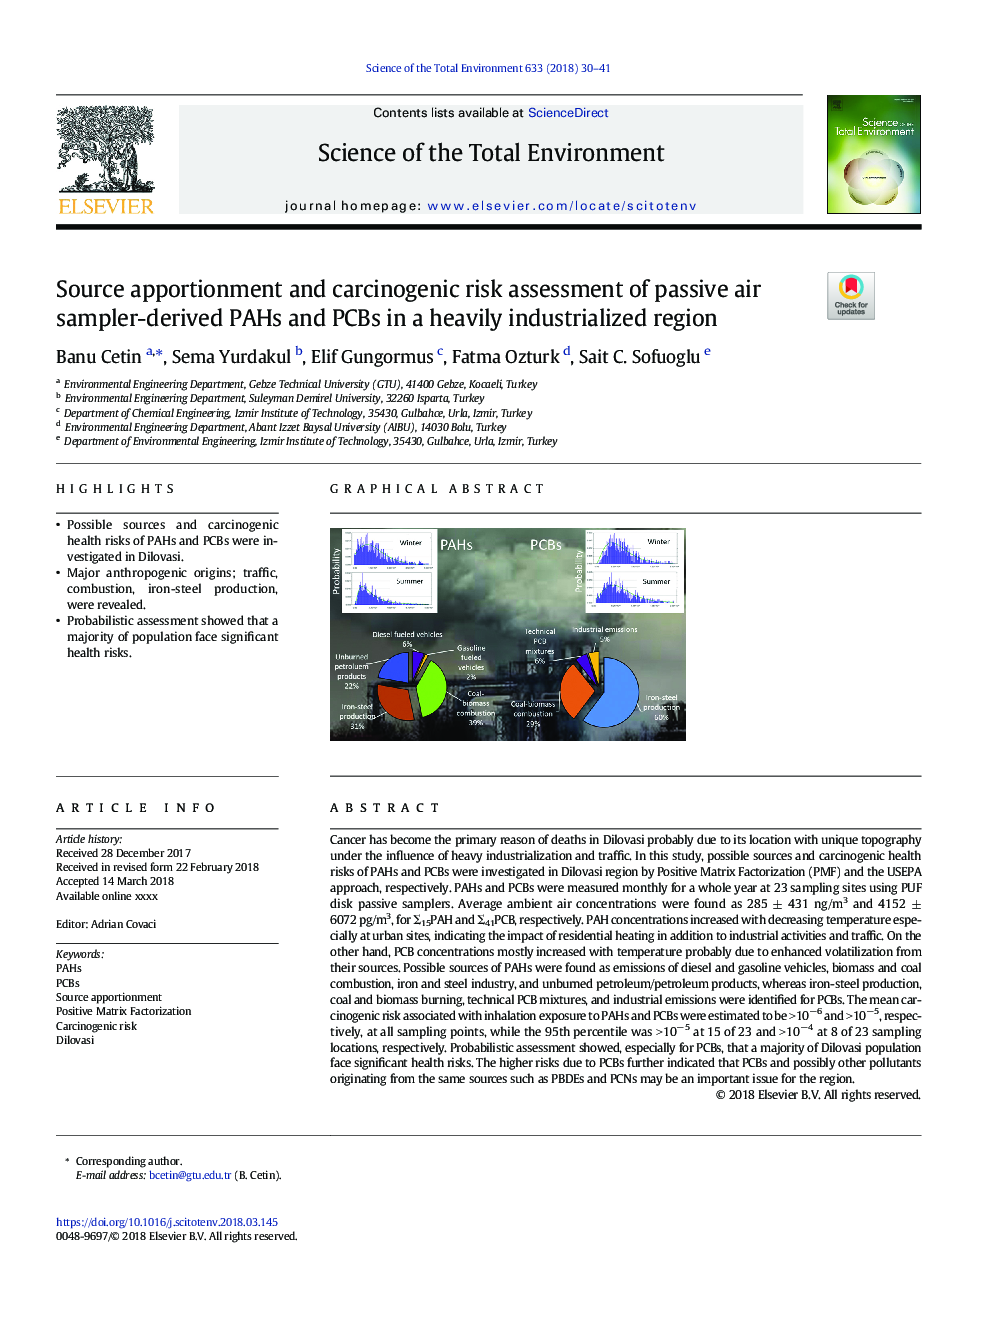 Source apportionment and carcinogenic risk assessment of passive air sampler-derived PAHs and PCBs in a heavily industrialized region